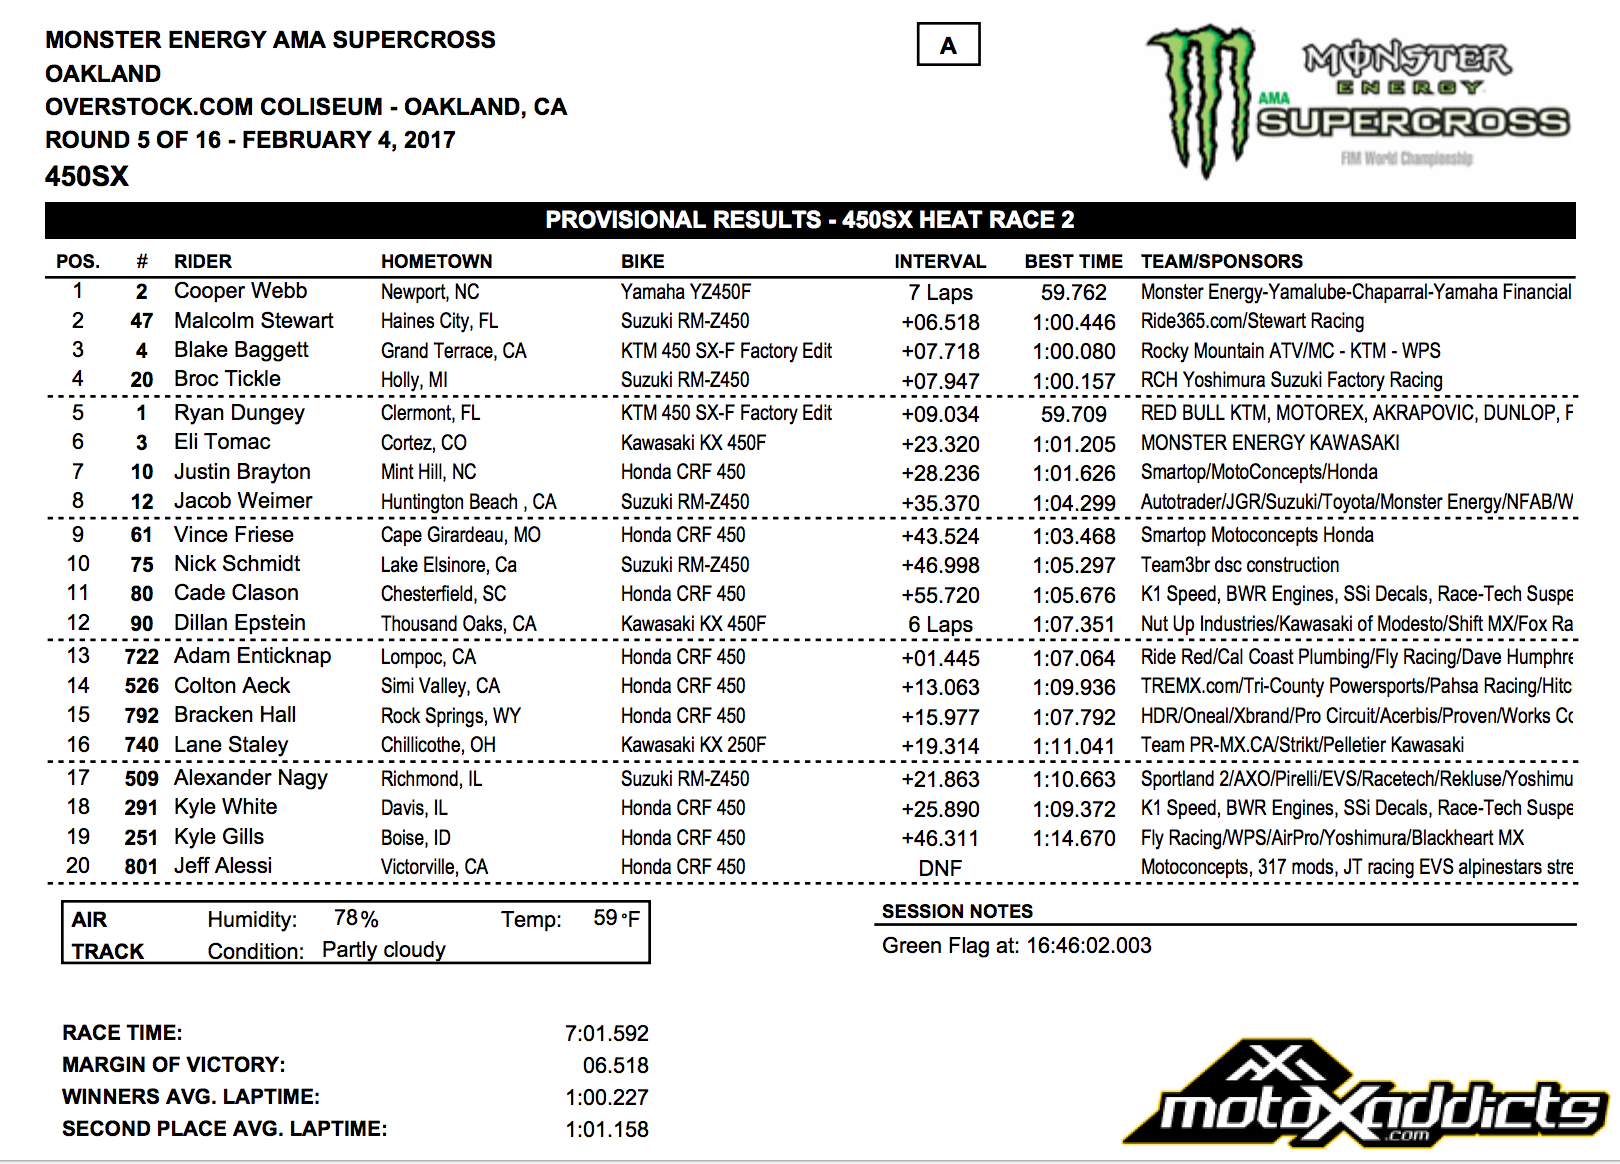 450SX Heat 2 Race Results - 2017 Oakland SX - Click to Enlarge